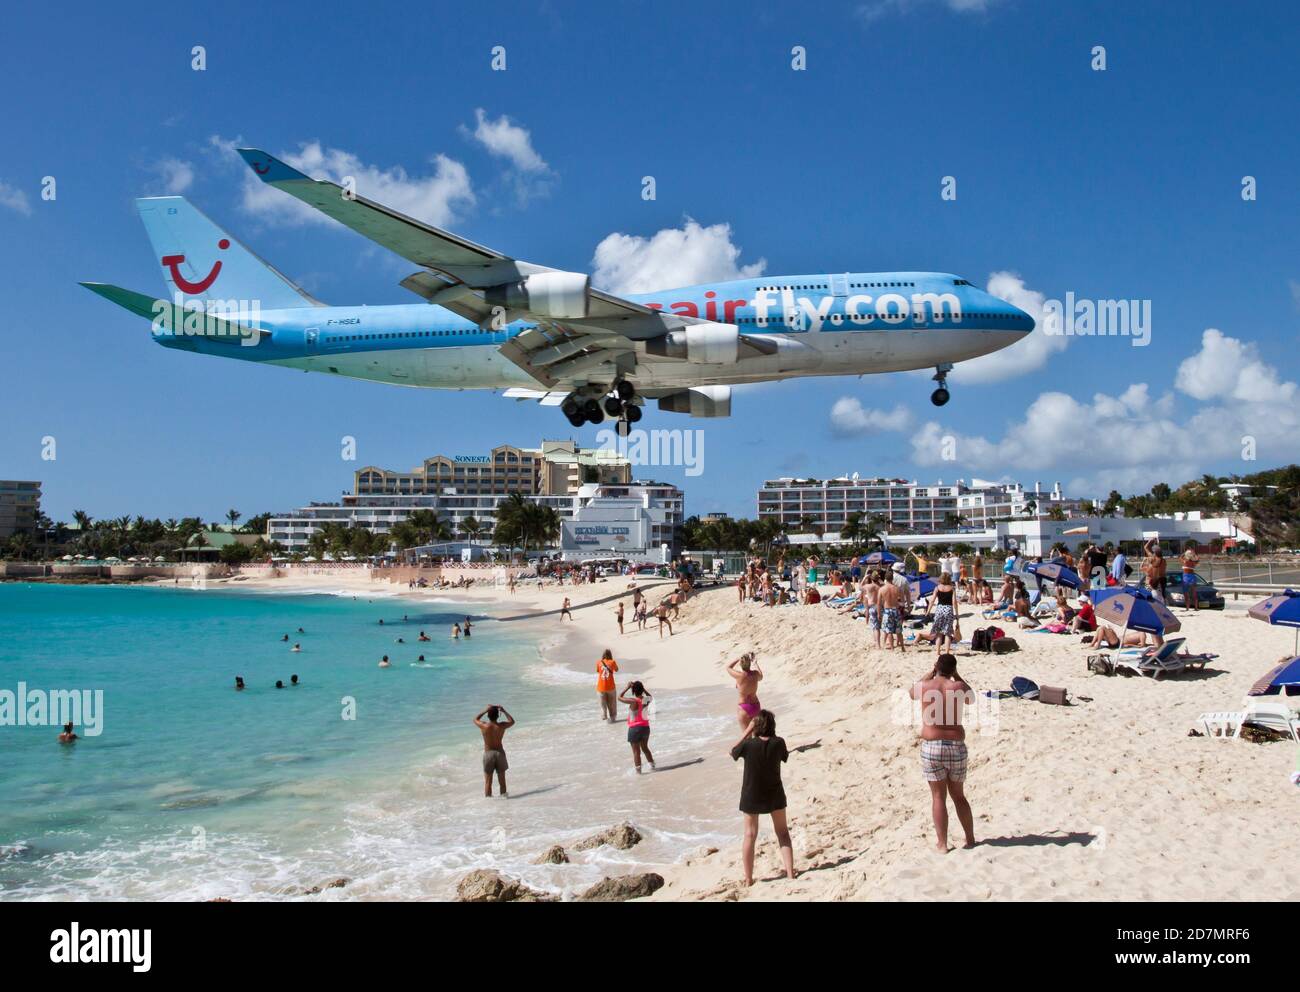 Princess Juliana International Airport is the main airport on the Caribbean island of Saint Martin/Sint Maarten and it's very close to the beach Stock Photo